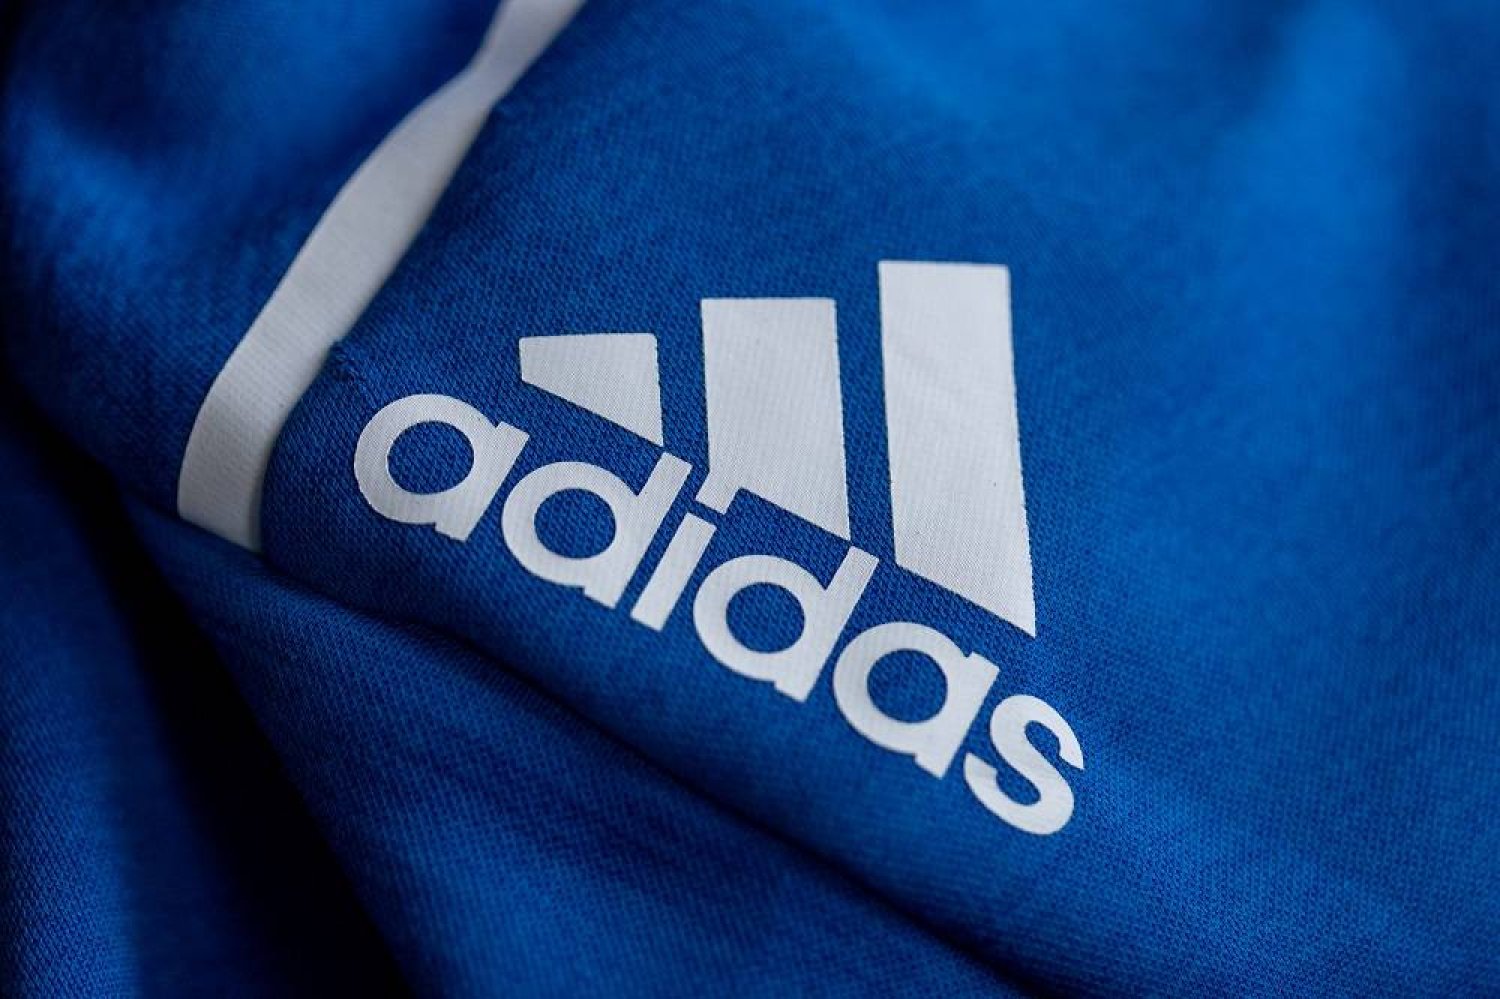 08 March 2022, Bavaria, Herzogenaurach: The logo of the sporting goods manufacturer Adidas on a blue jacket. (dpa)